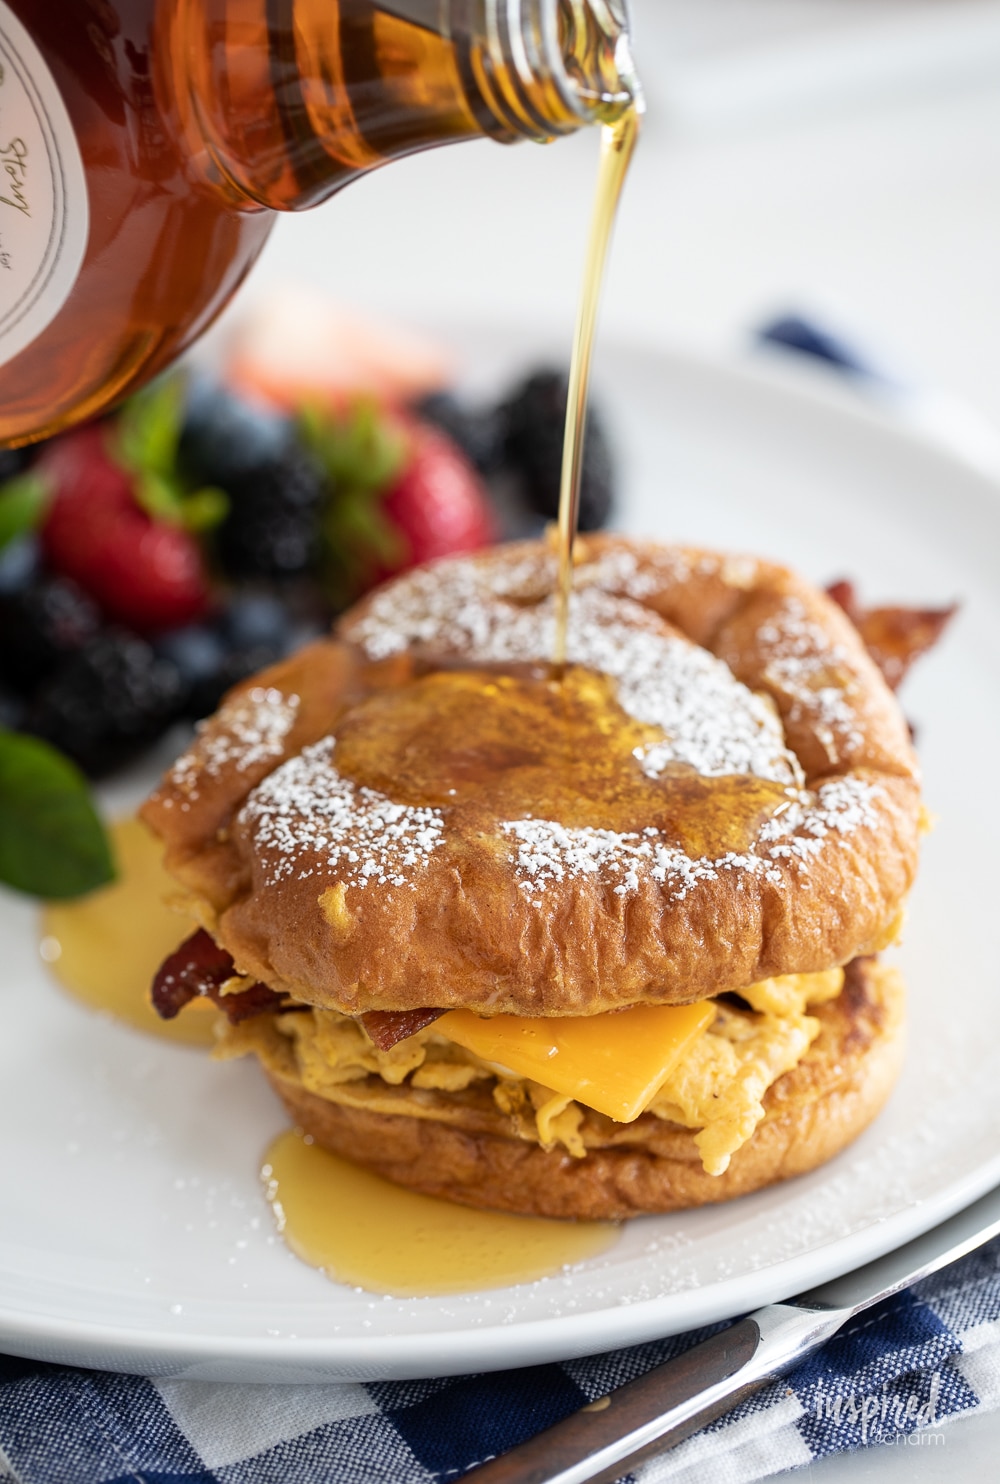 pouring maple syrup on french toast breakfast sandwiches.